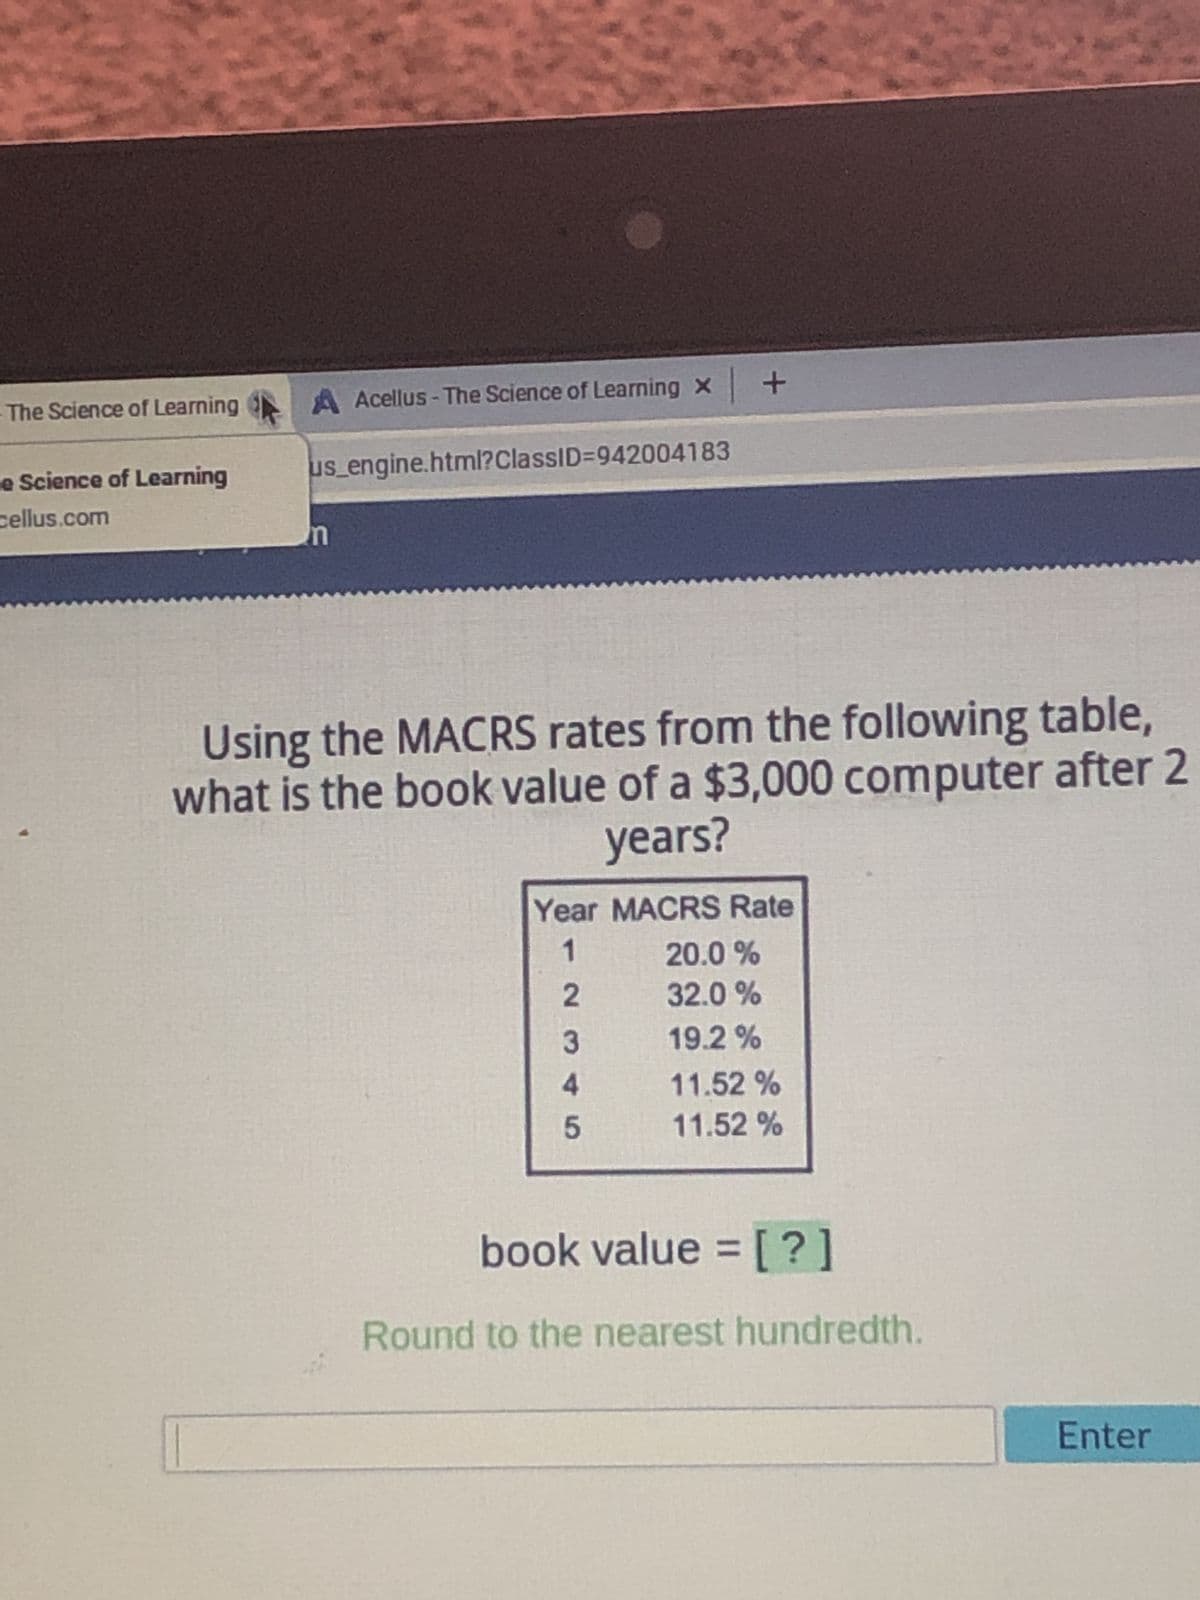 A Acellus - The Science of Learning x +
us_engine.html?ClassID=942004183
n
Using the MACRS rates from the following table,
what is the book value of a $3,000 computer after 2
years?
Year MACRS Rate
1
20.0 %
2
32.0%
3
19.2%
4
11.52 %
5
11.52 %
book value = [?]
Round to the nearest hundredth.
The Science of Learning
e Science of Learning
cellus.com
Enter